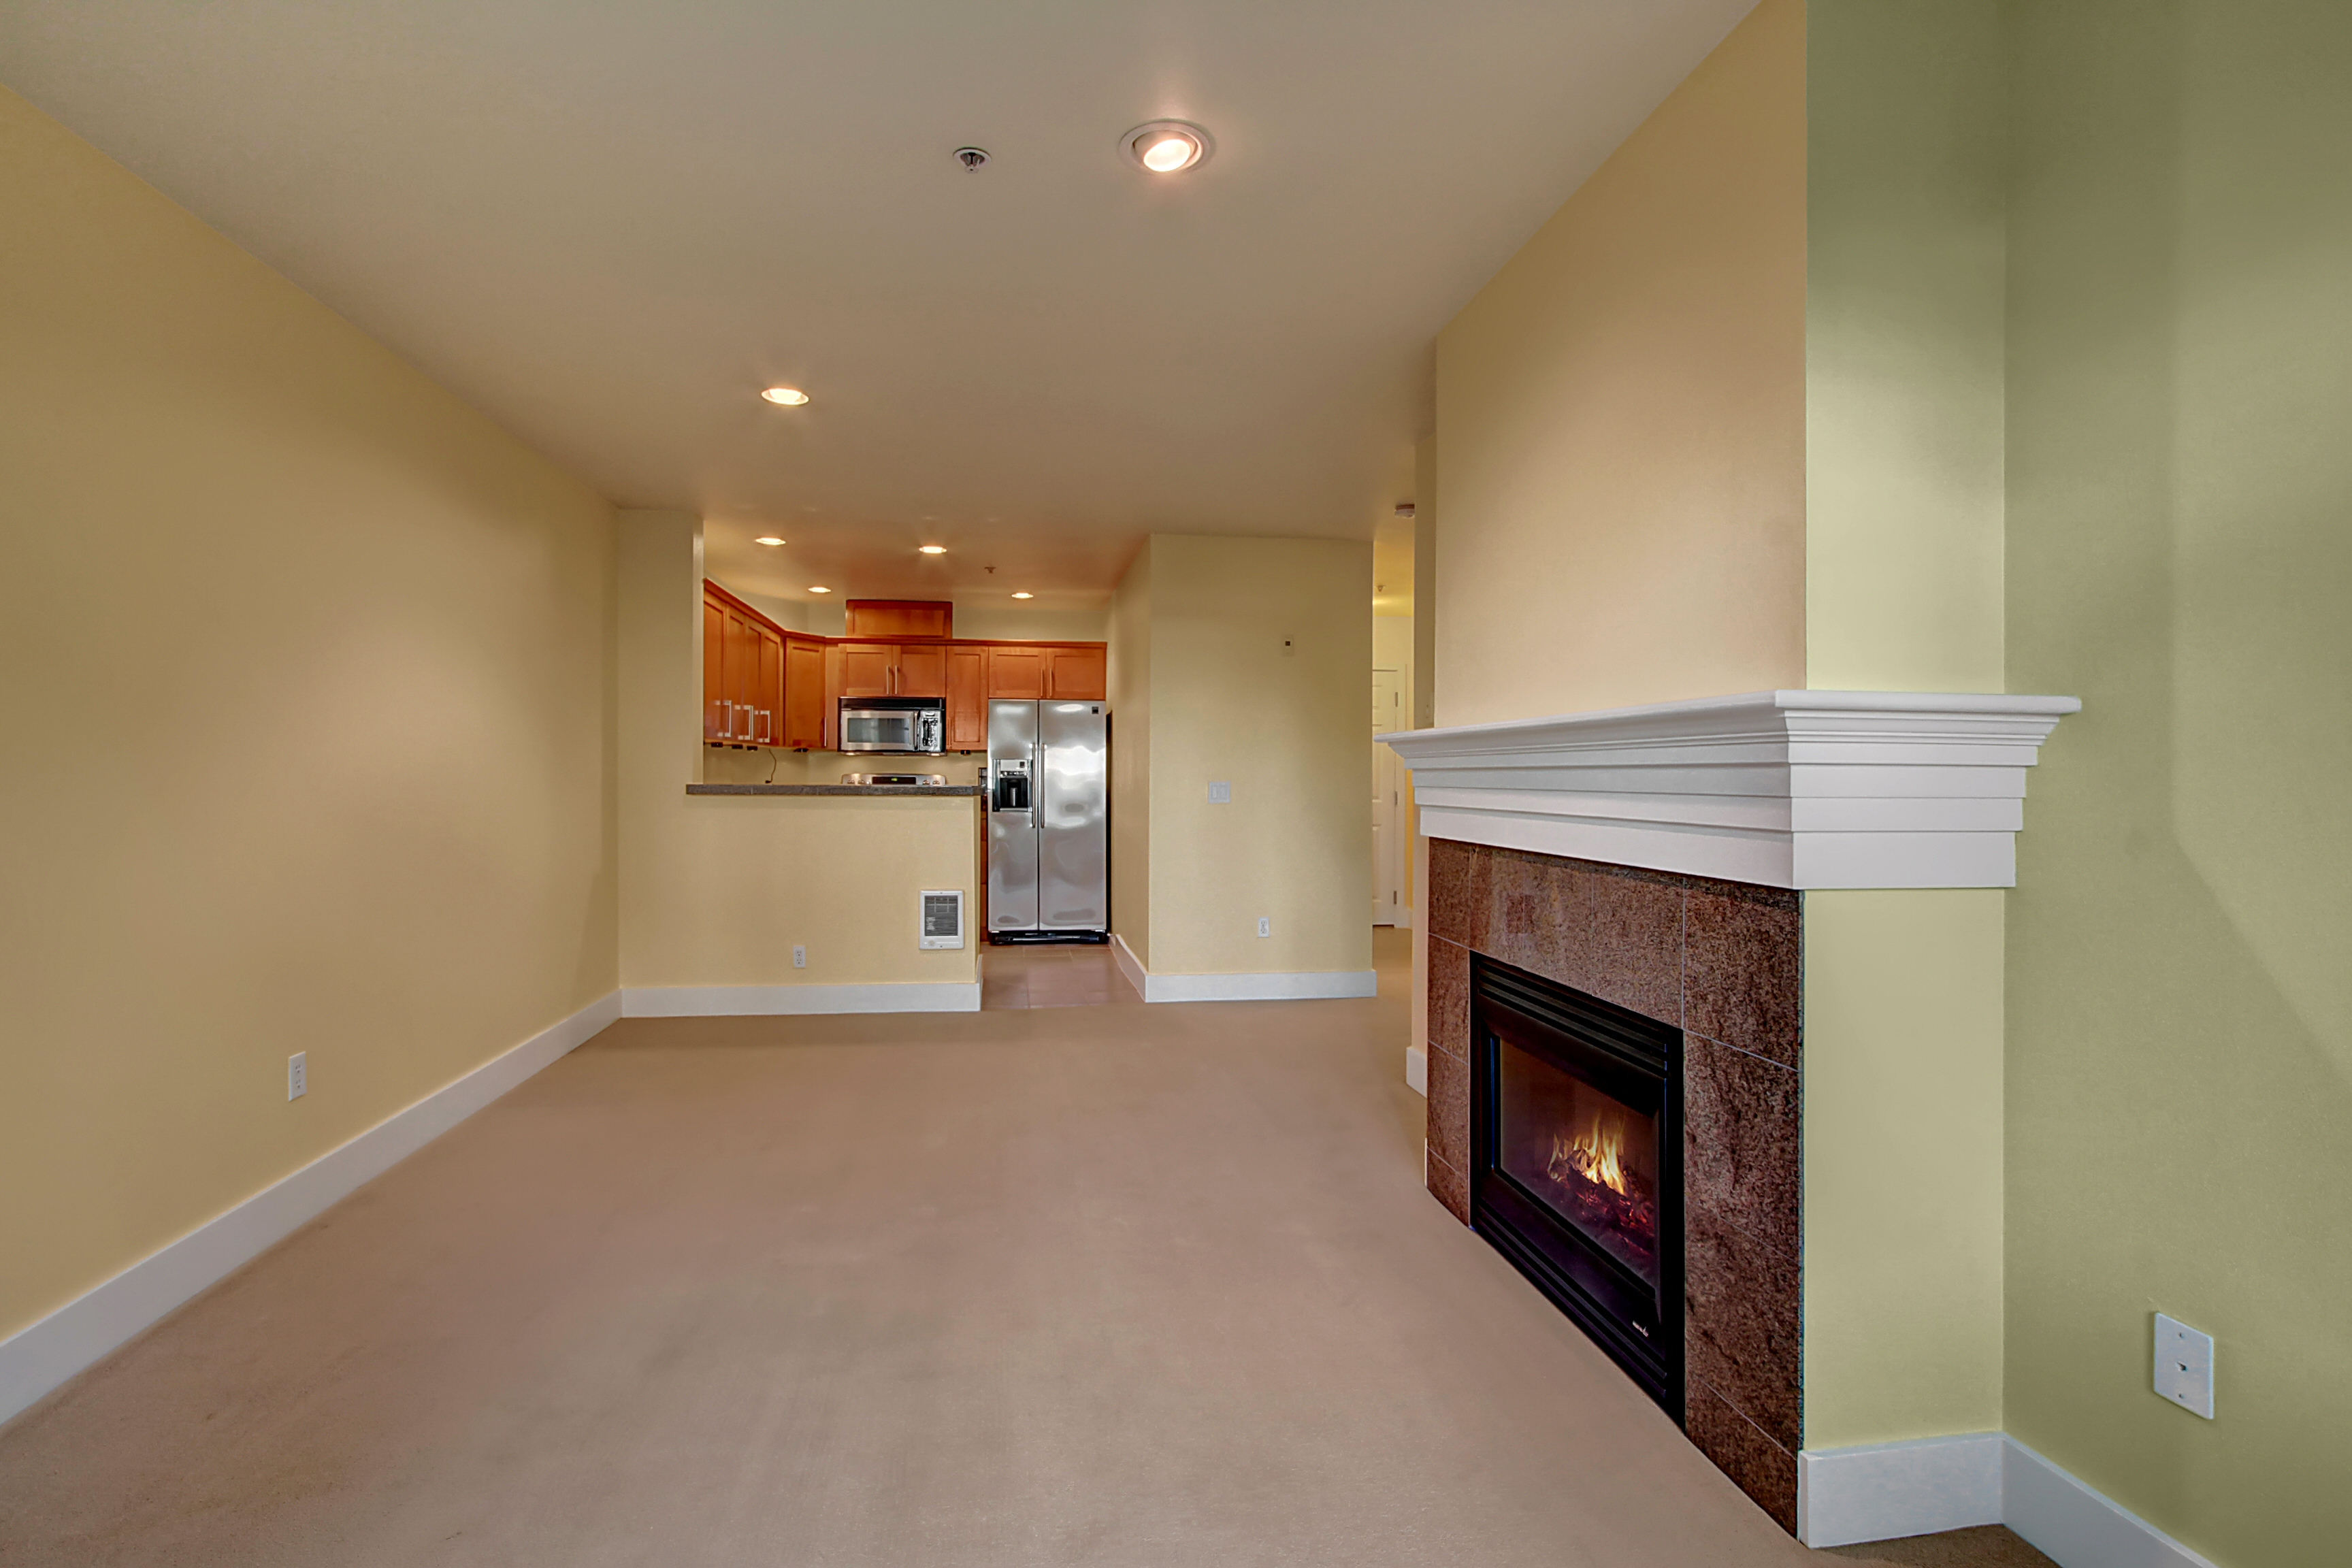 Property Photo: Living room 123 Queen Anne Ave N 206  WA 98109 